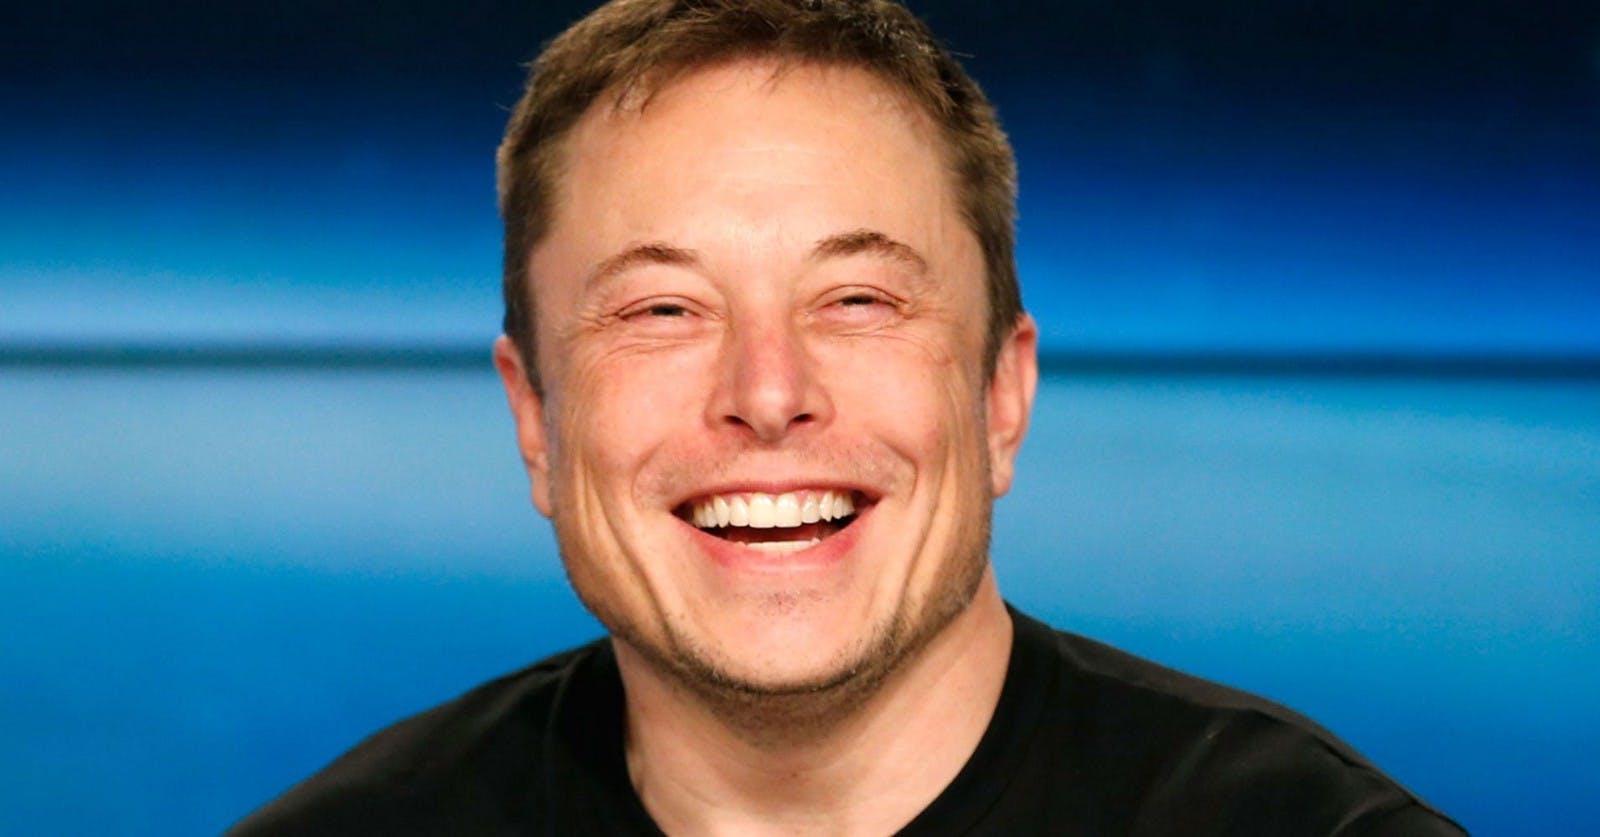 featured image - Some Lessons From Elon Musk